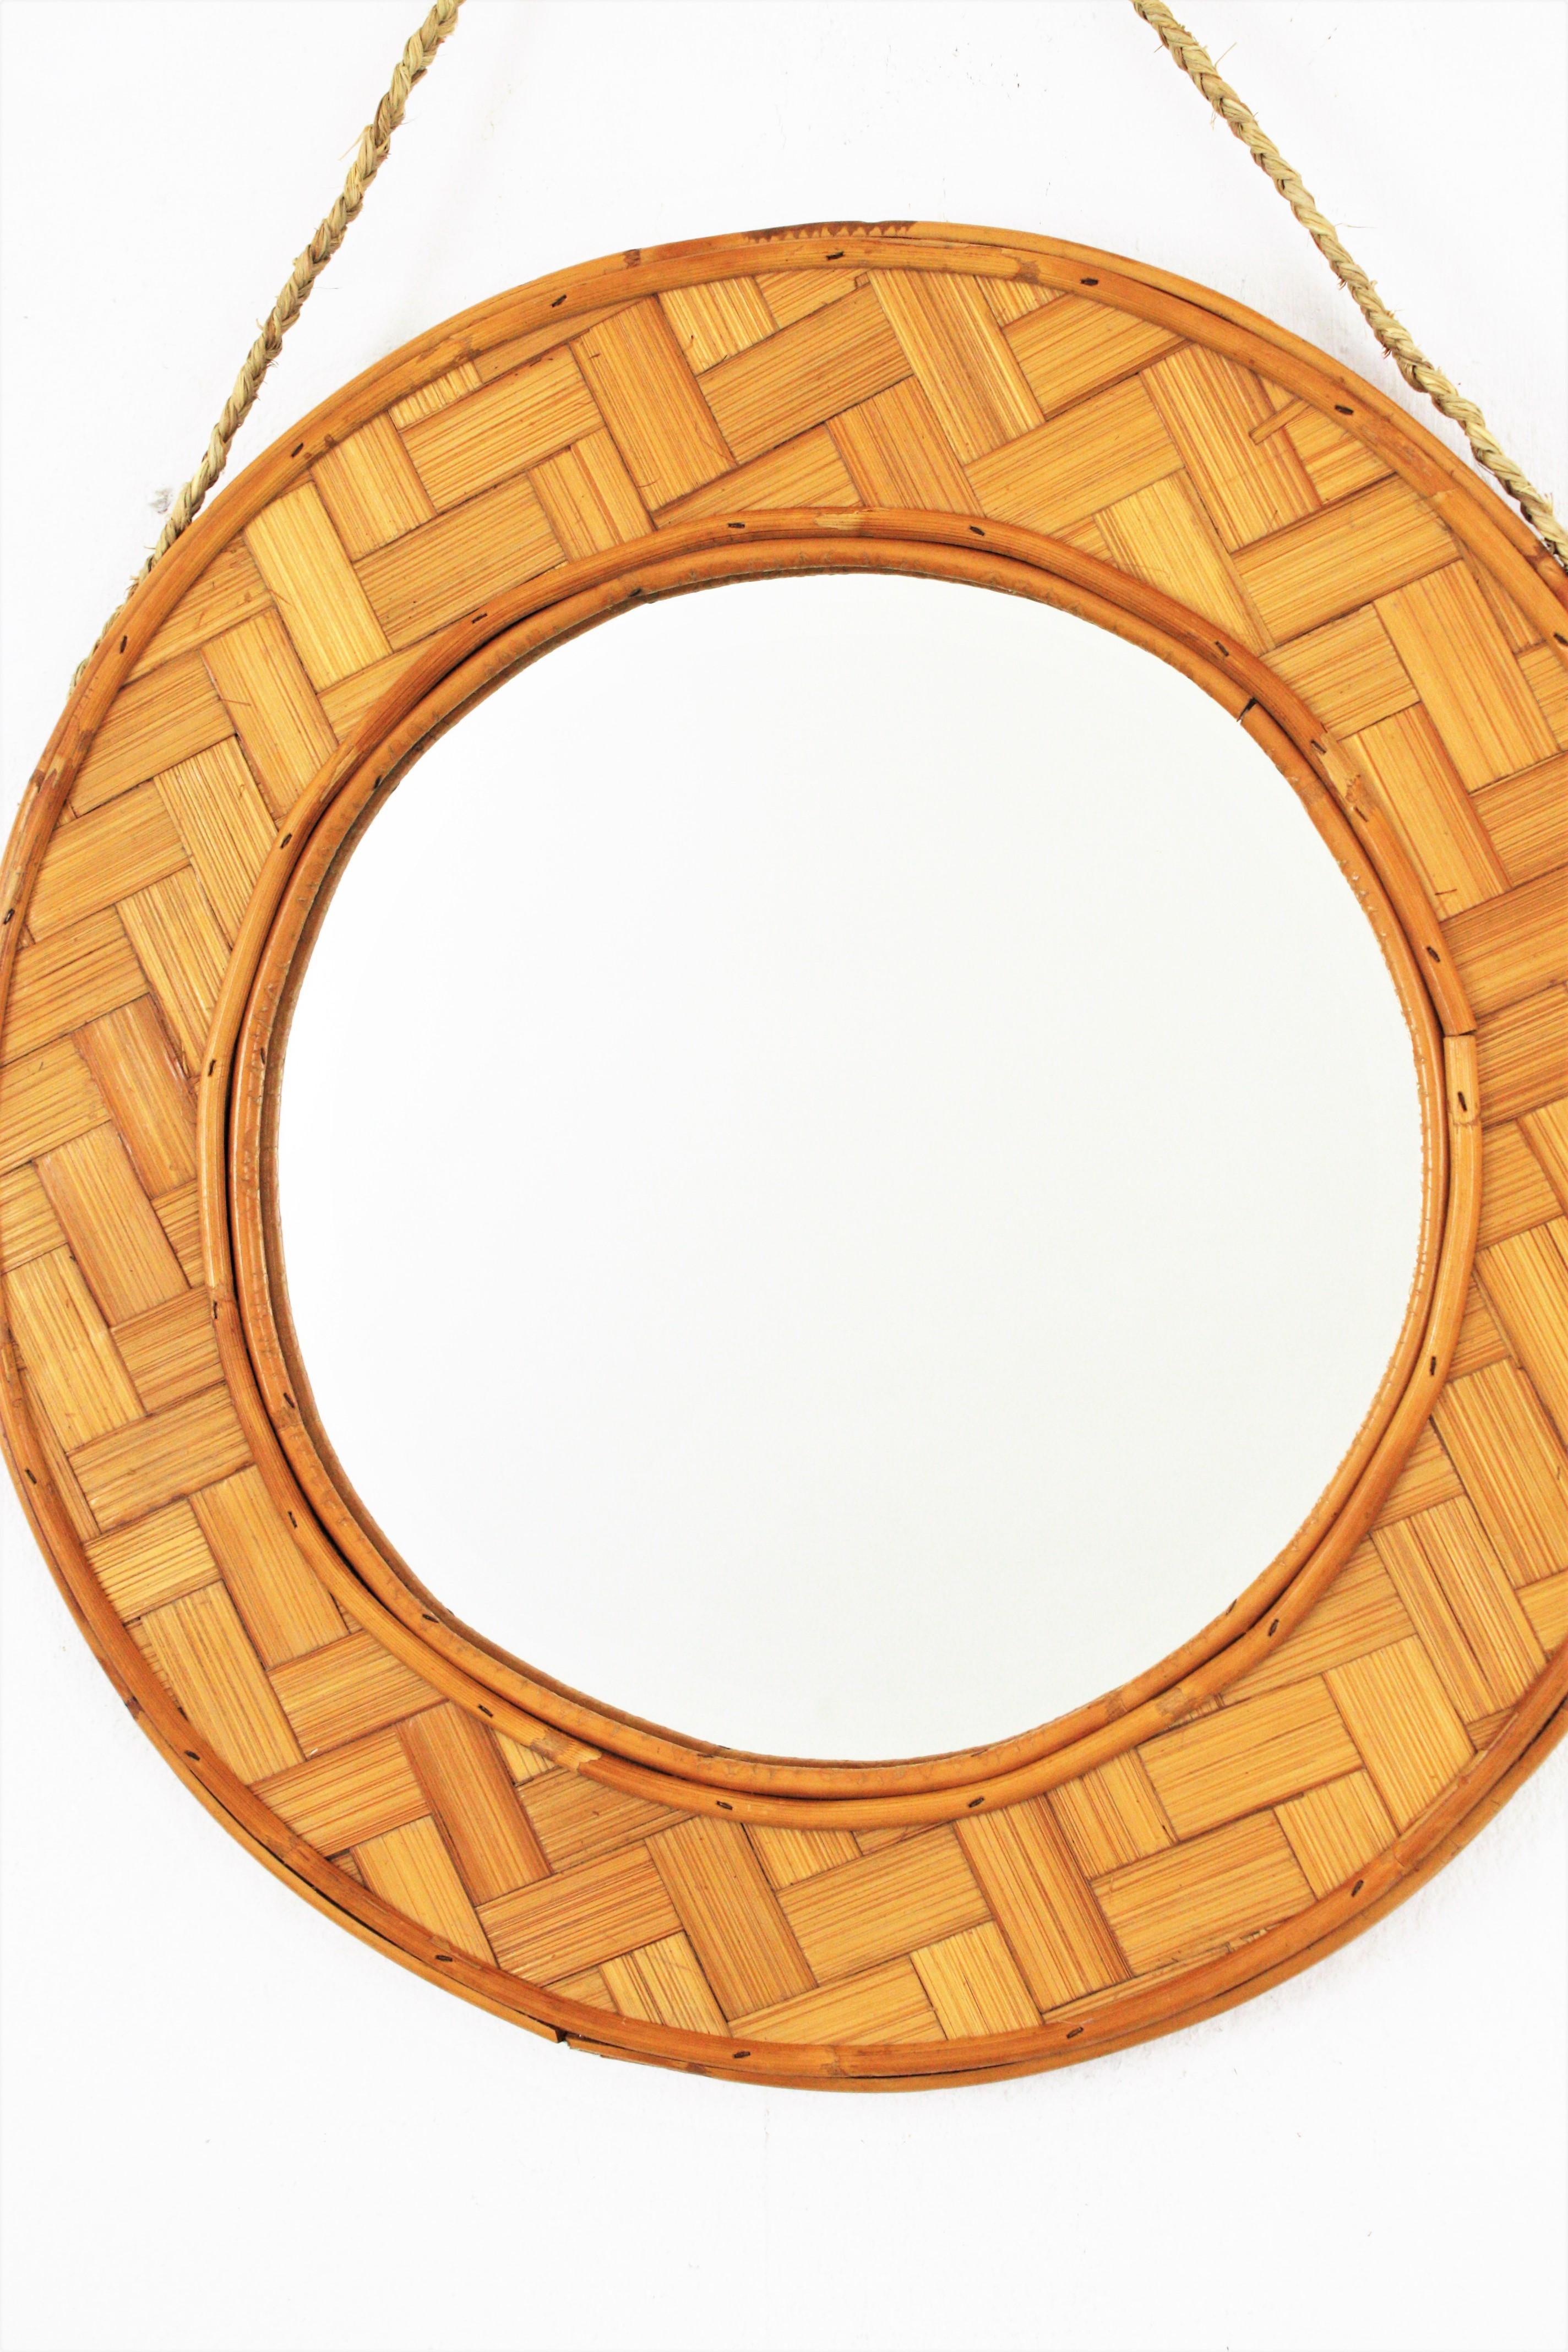 Hand-Crafted Spanish Rattan Bamboo Woven Round Mirror For Sale